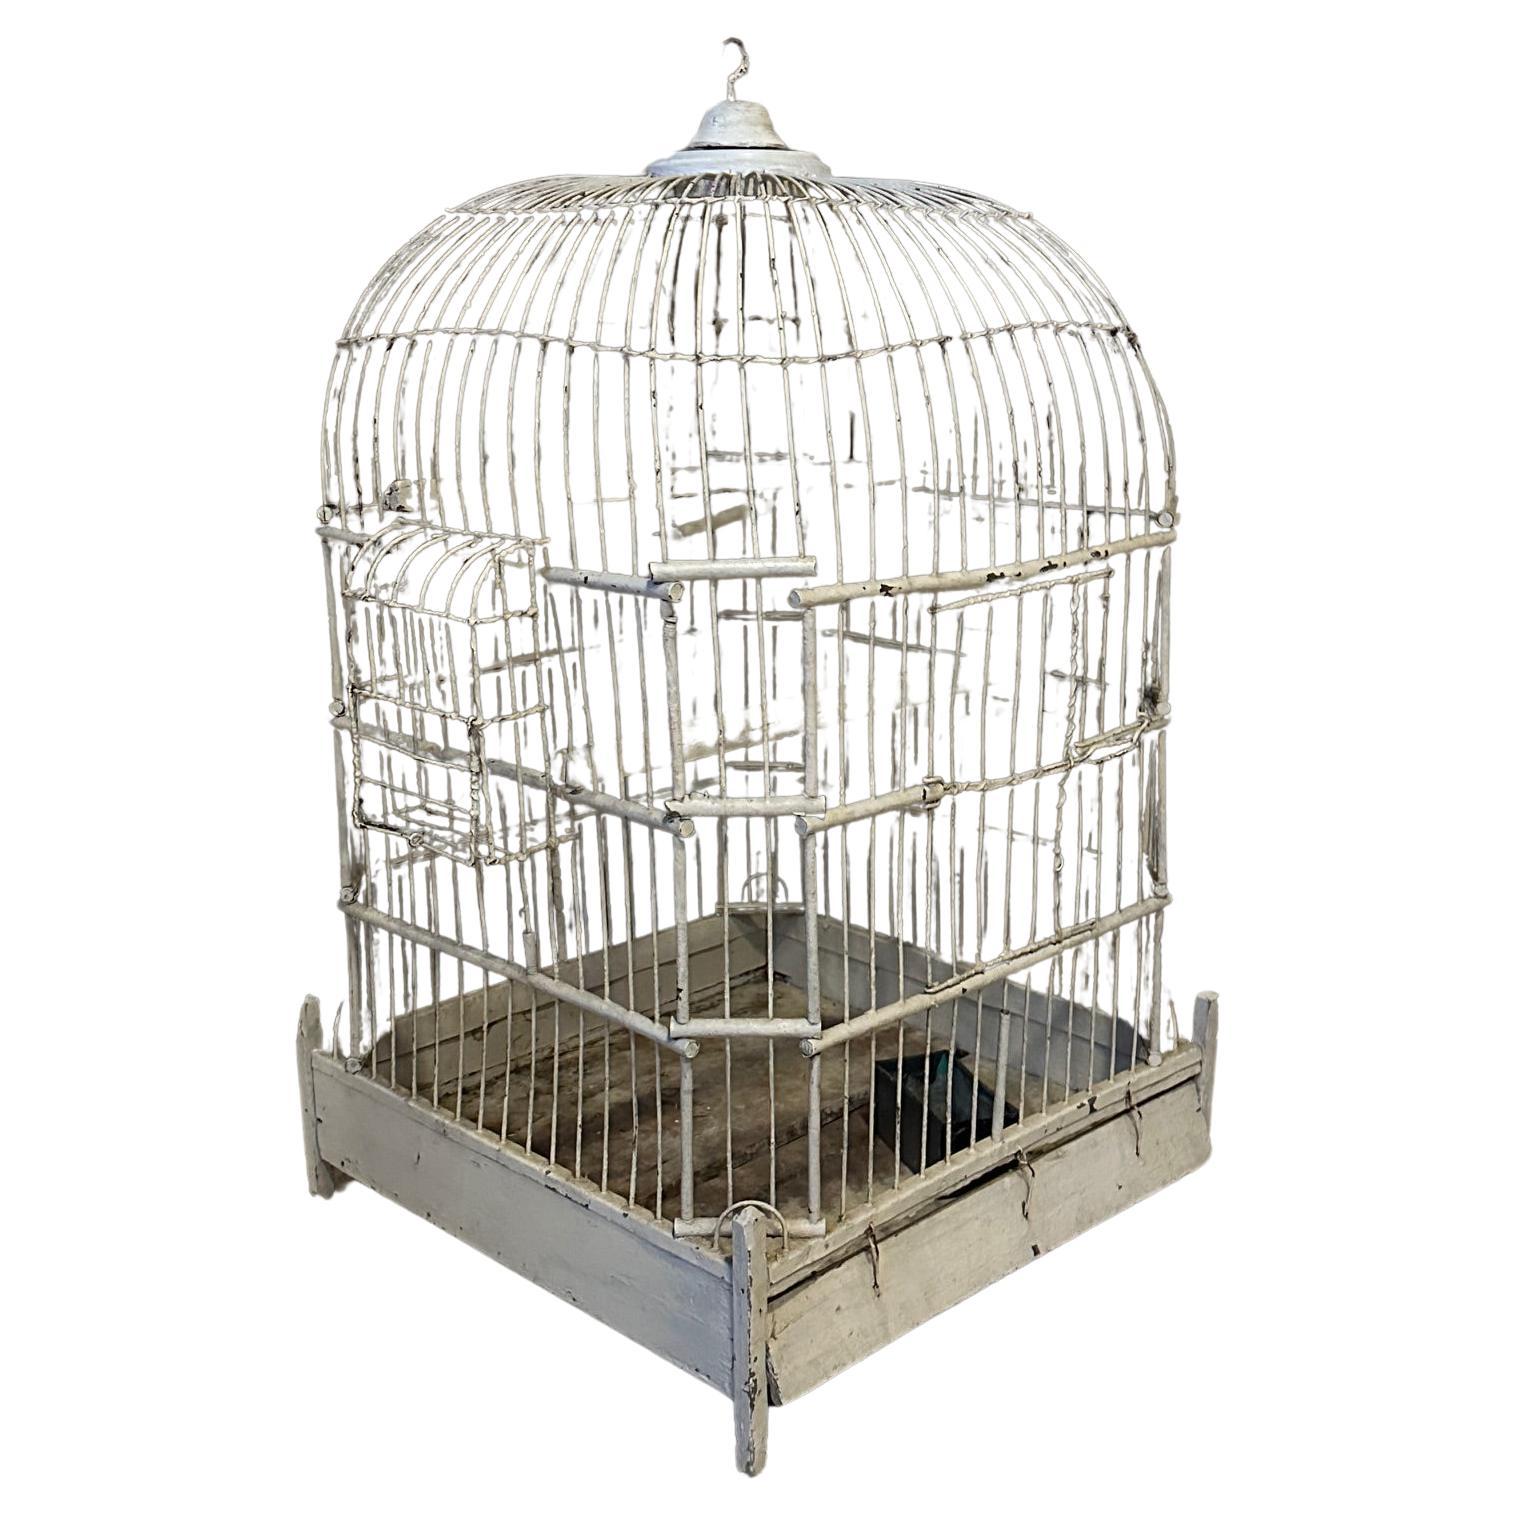 20th century French Painted Metal and Wood Bird Cage, 1920s For Sale